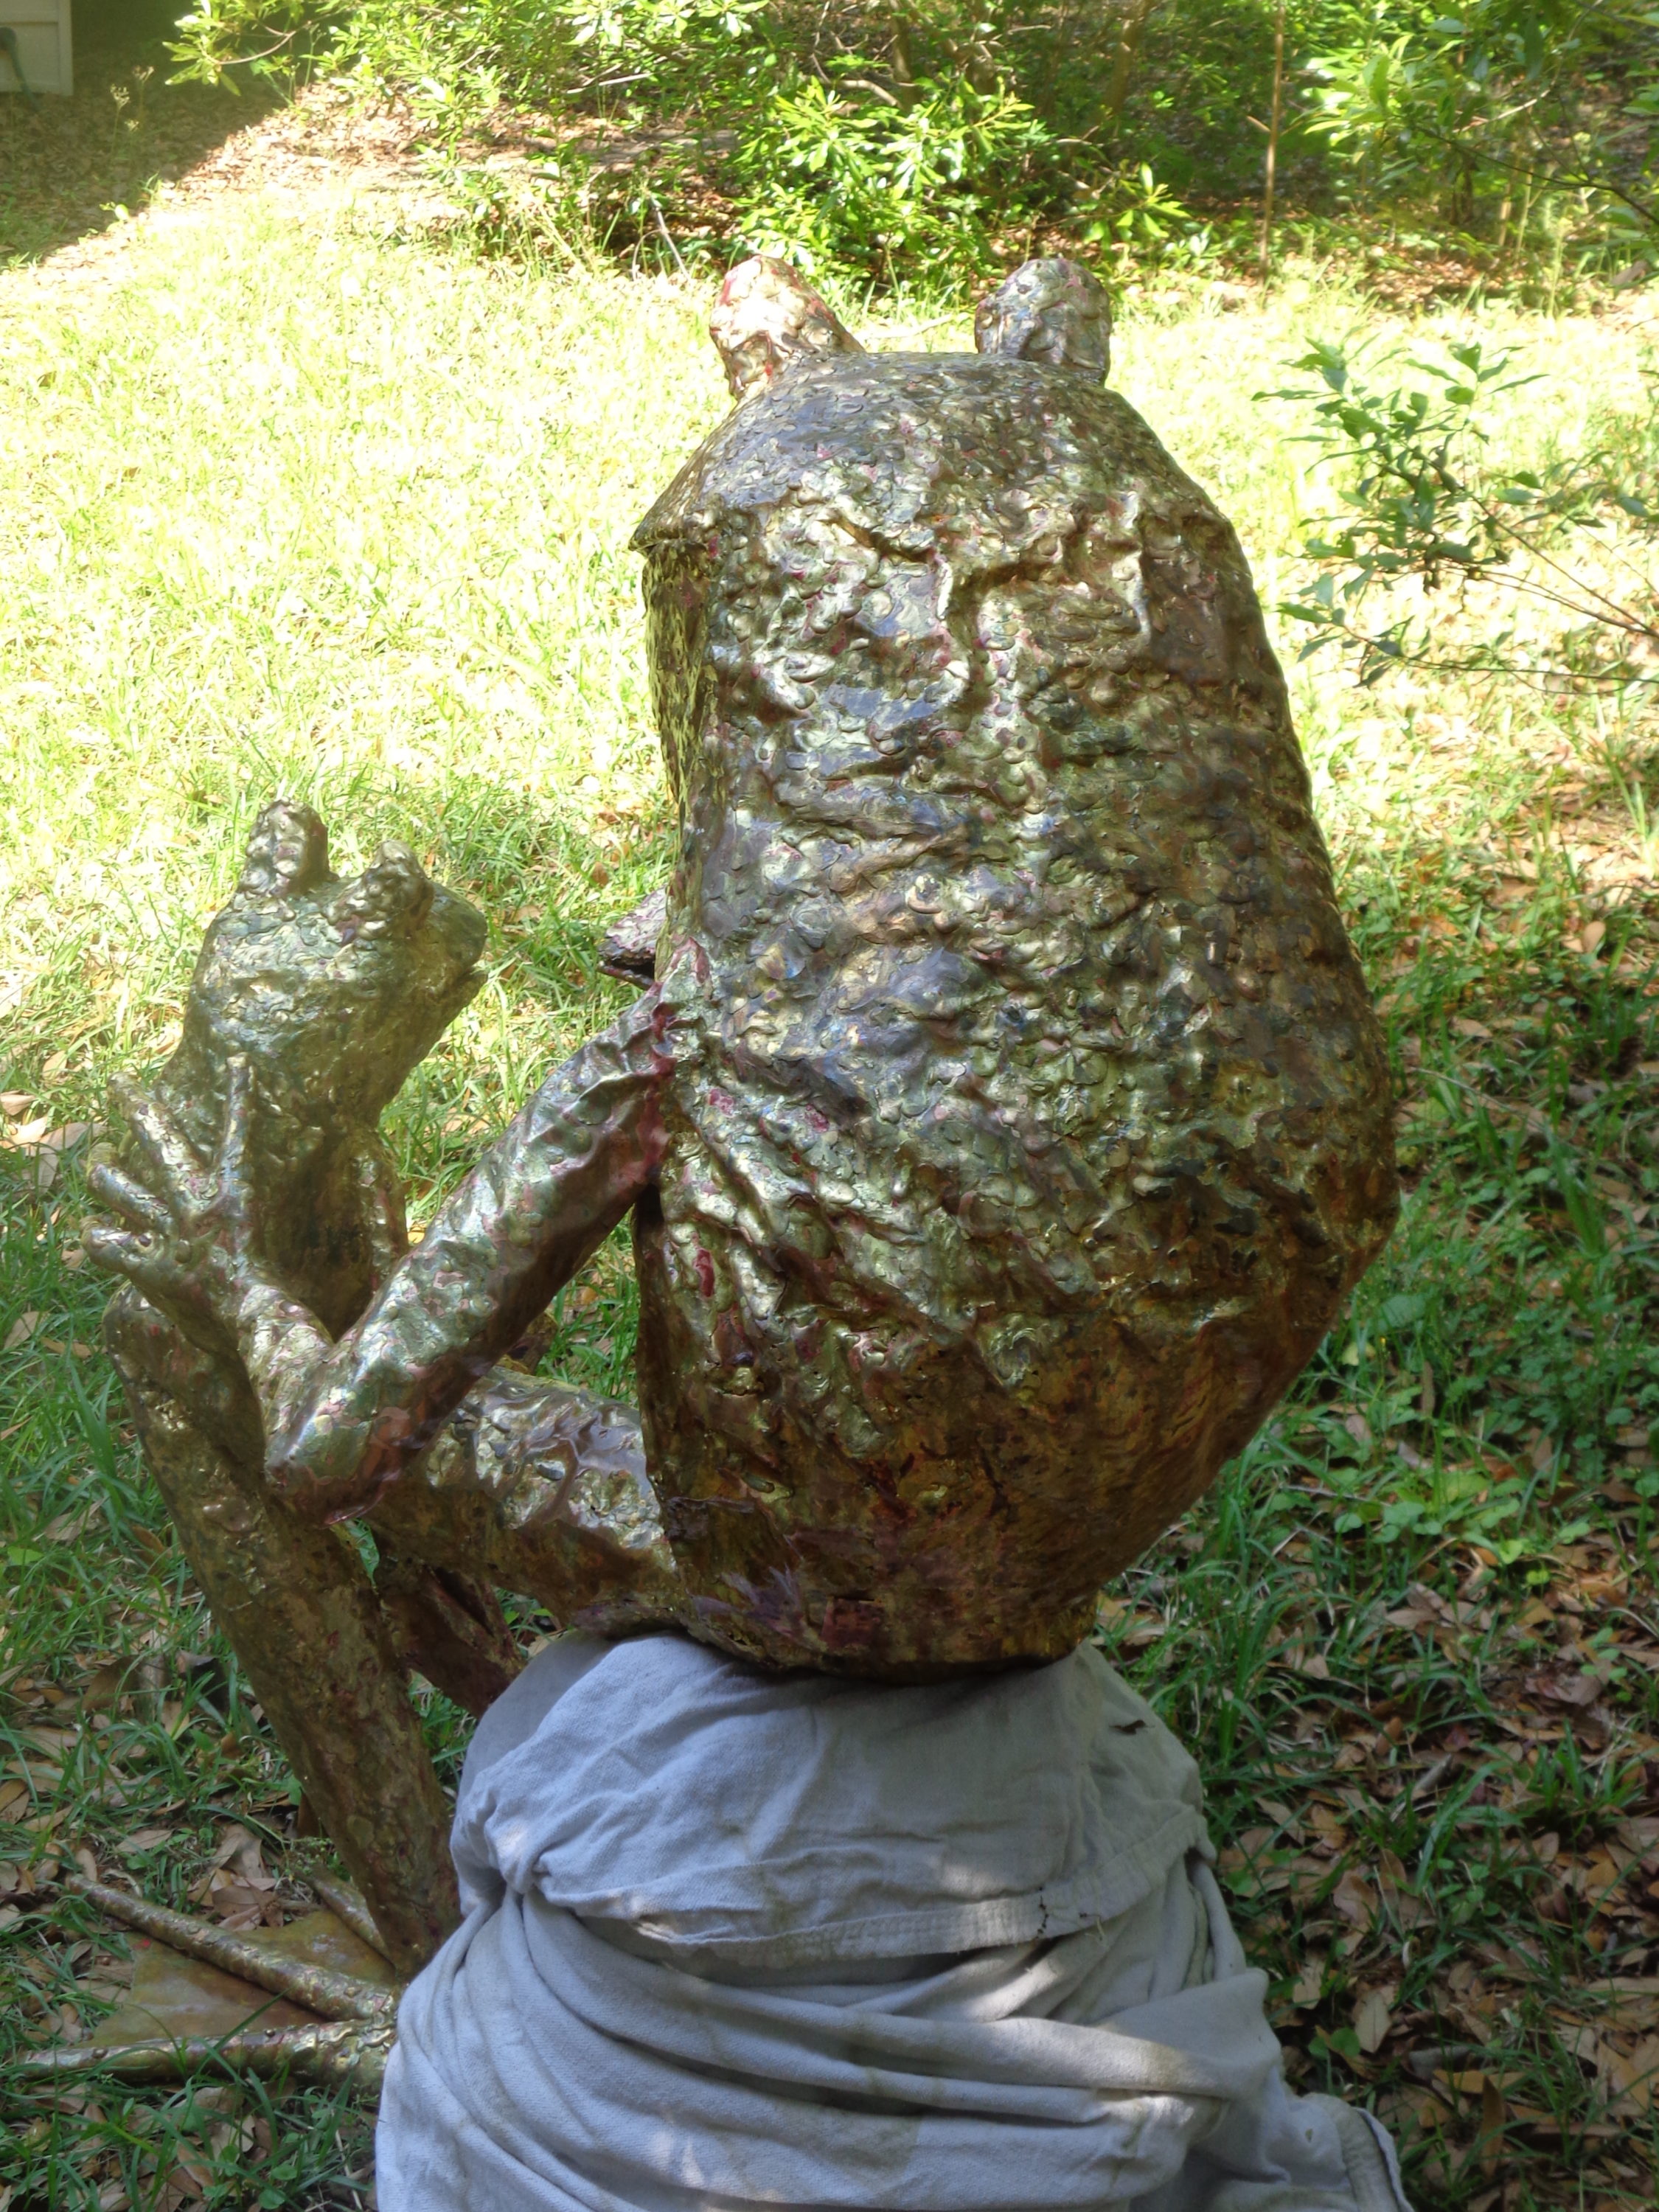 frog sculpture parent and child with book 4-20-2017 beau smith (11)